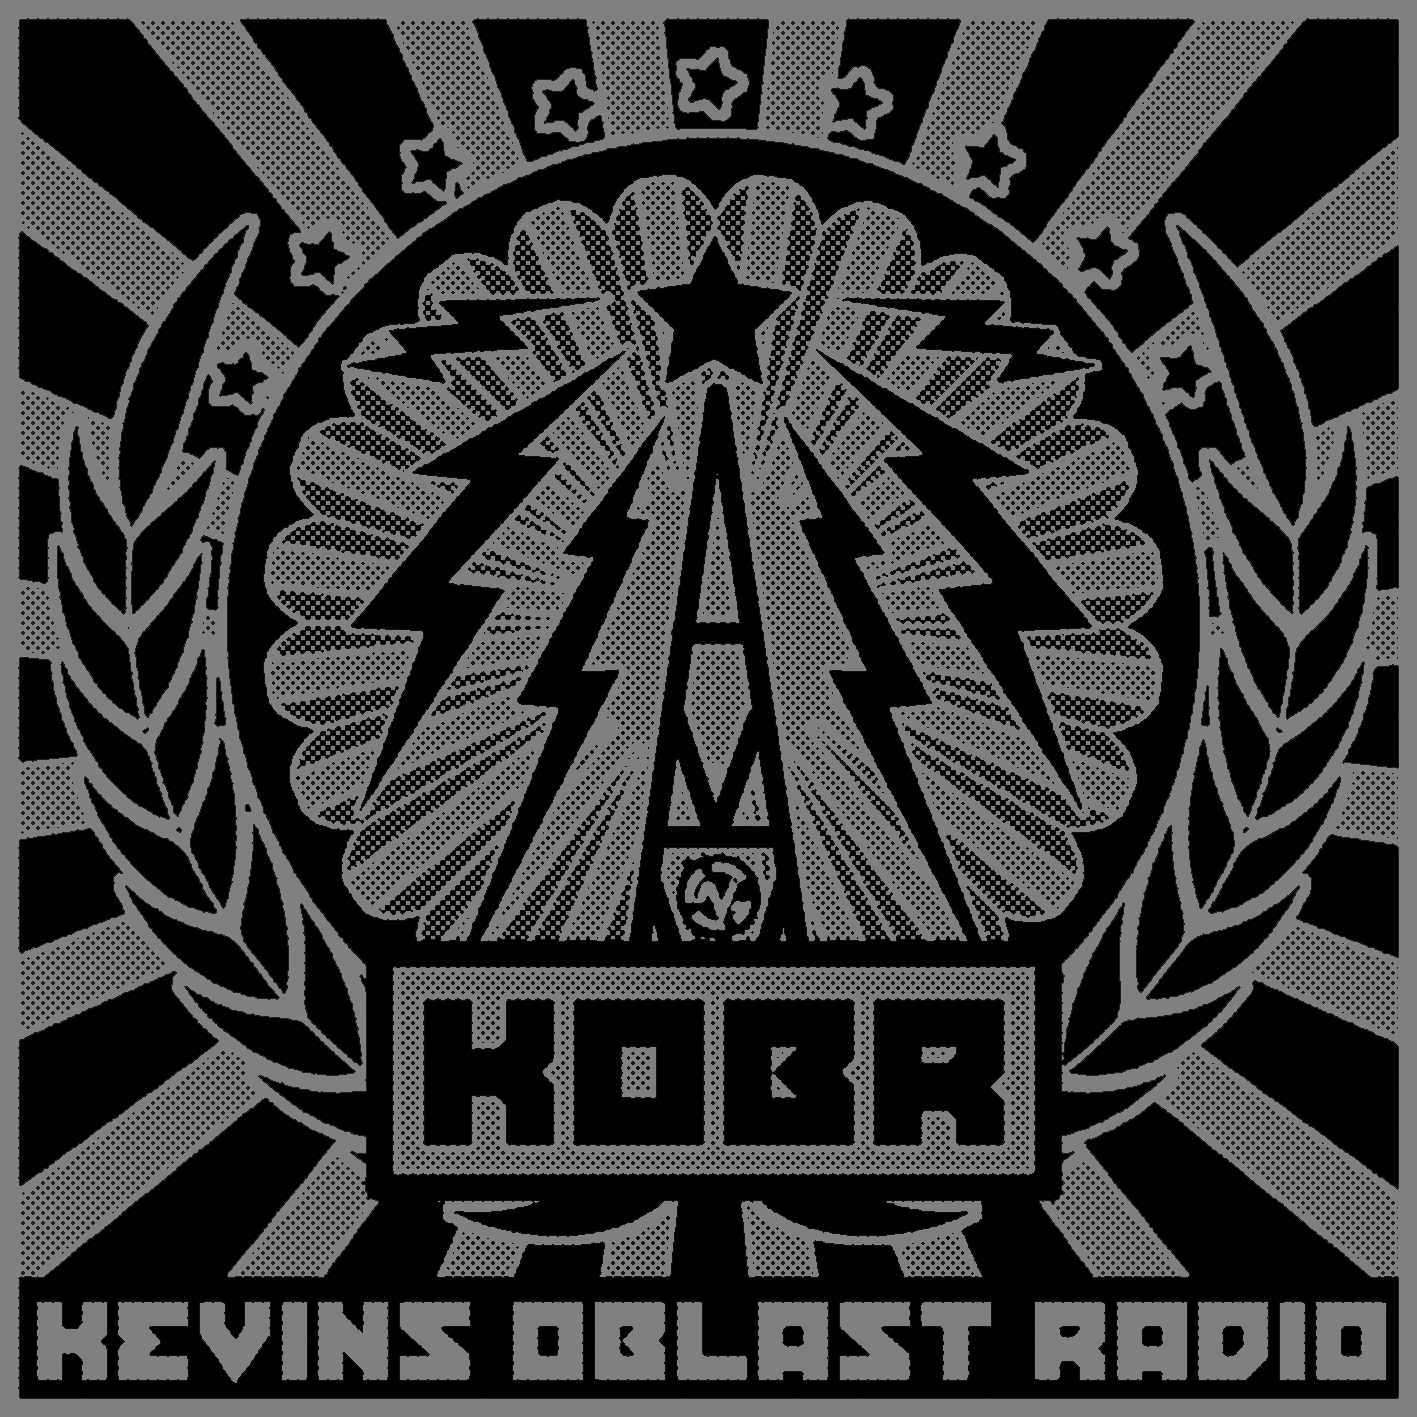 cover art for Kevin's Oblast Radio - New Zealand